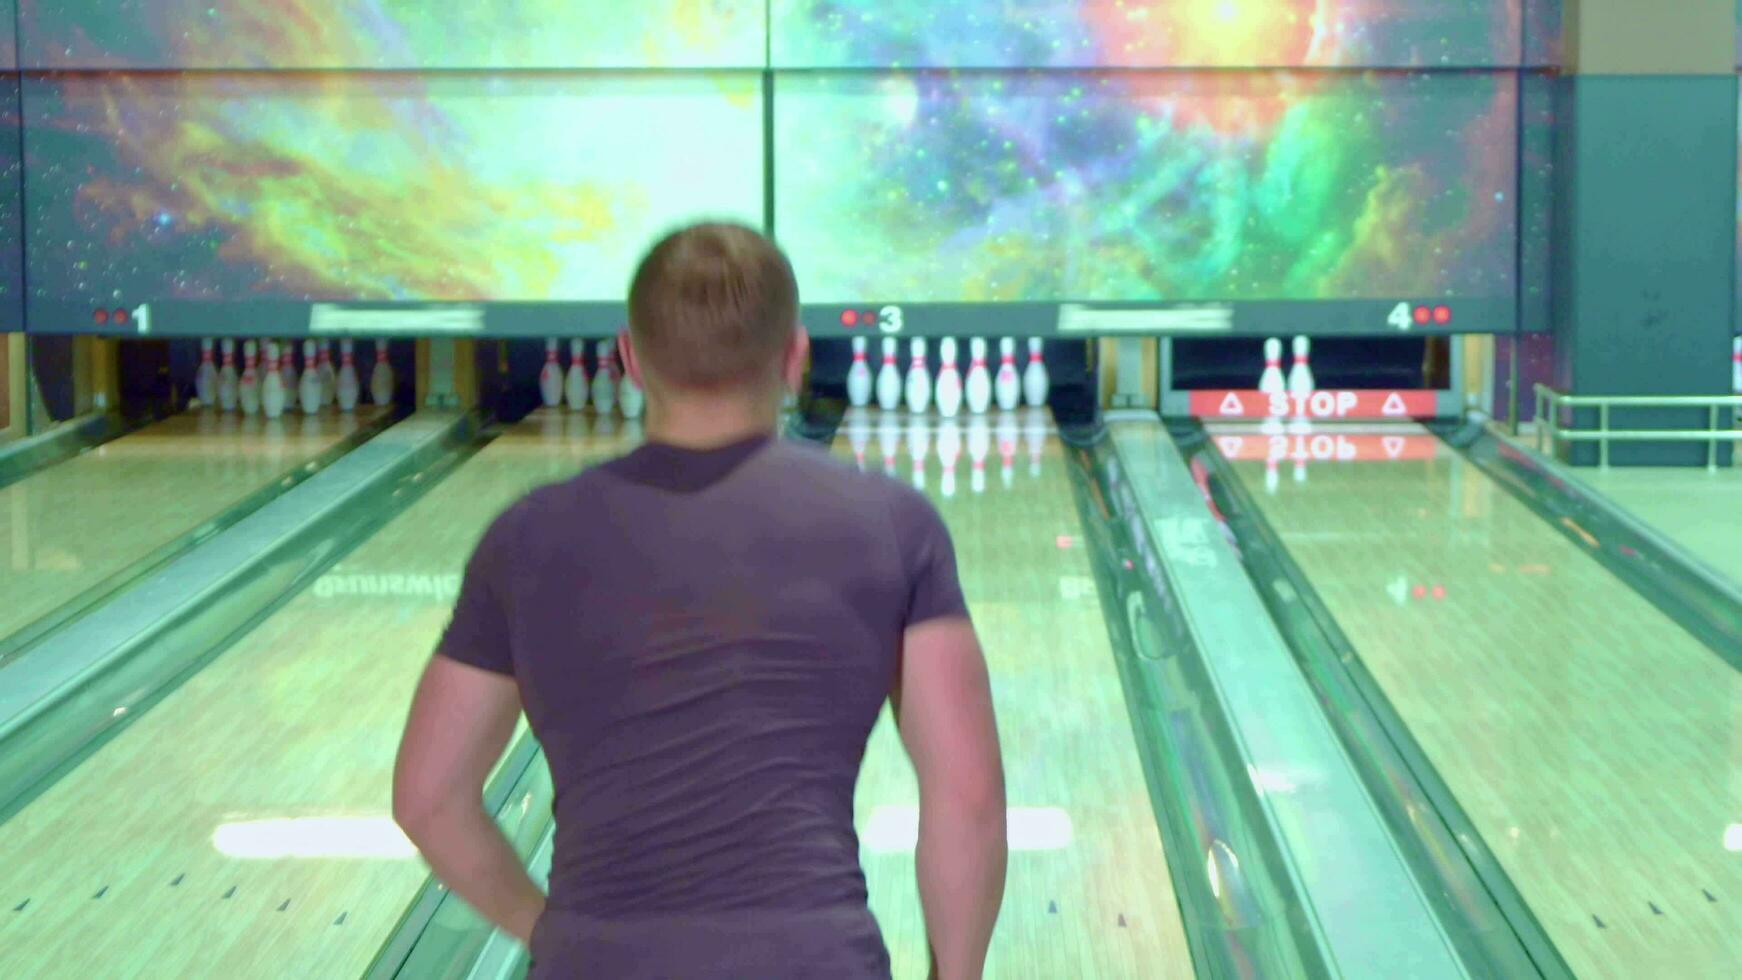 Guy moonwalks at the bowling alley photo